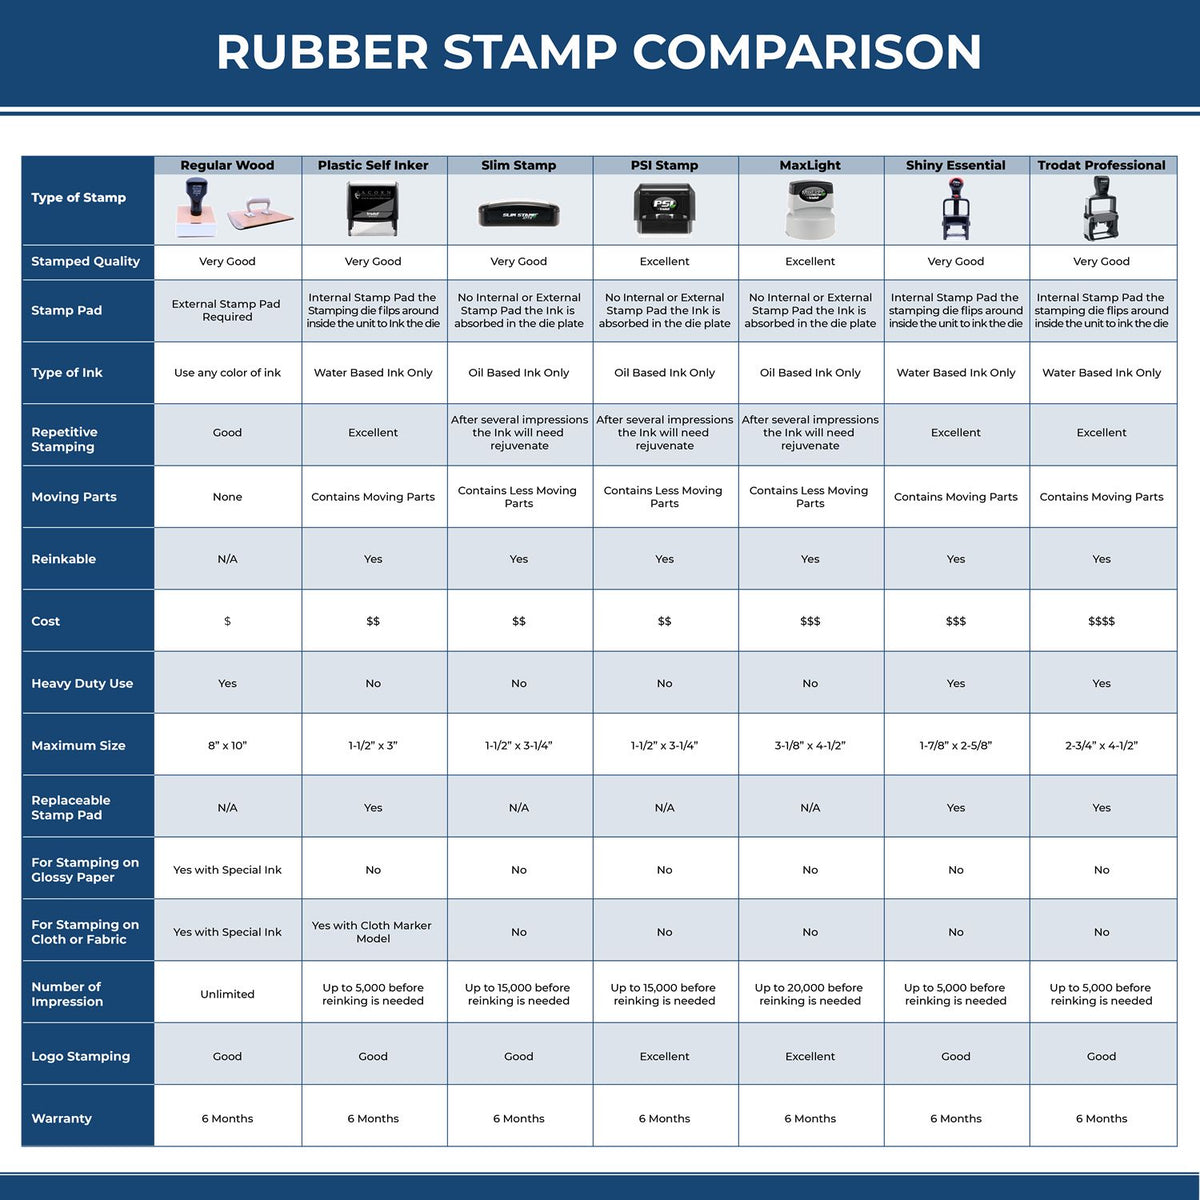 A comparison chart for the different types of mount models available for the MaxLight Premium Pre-Inked Ohio State Seal Notarial Stamp.